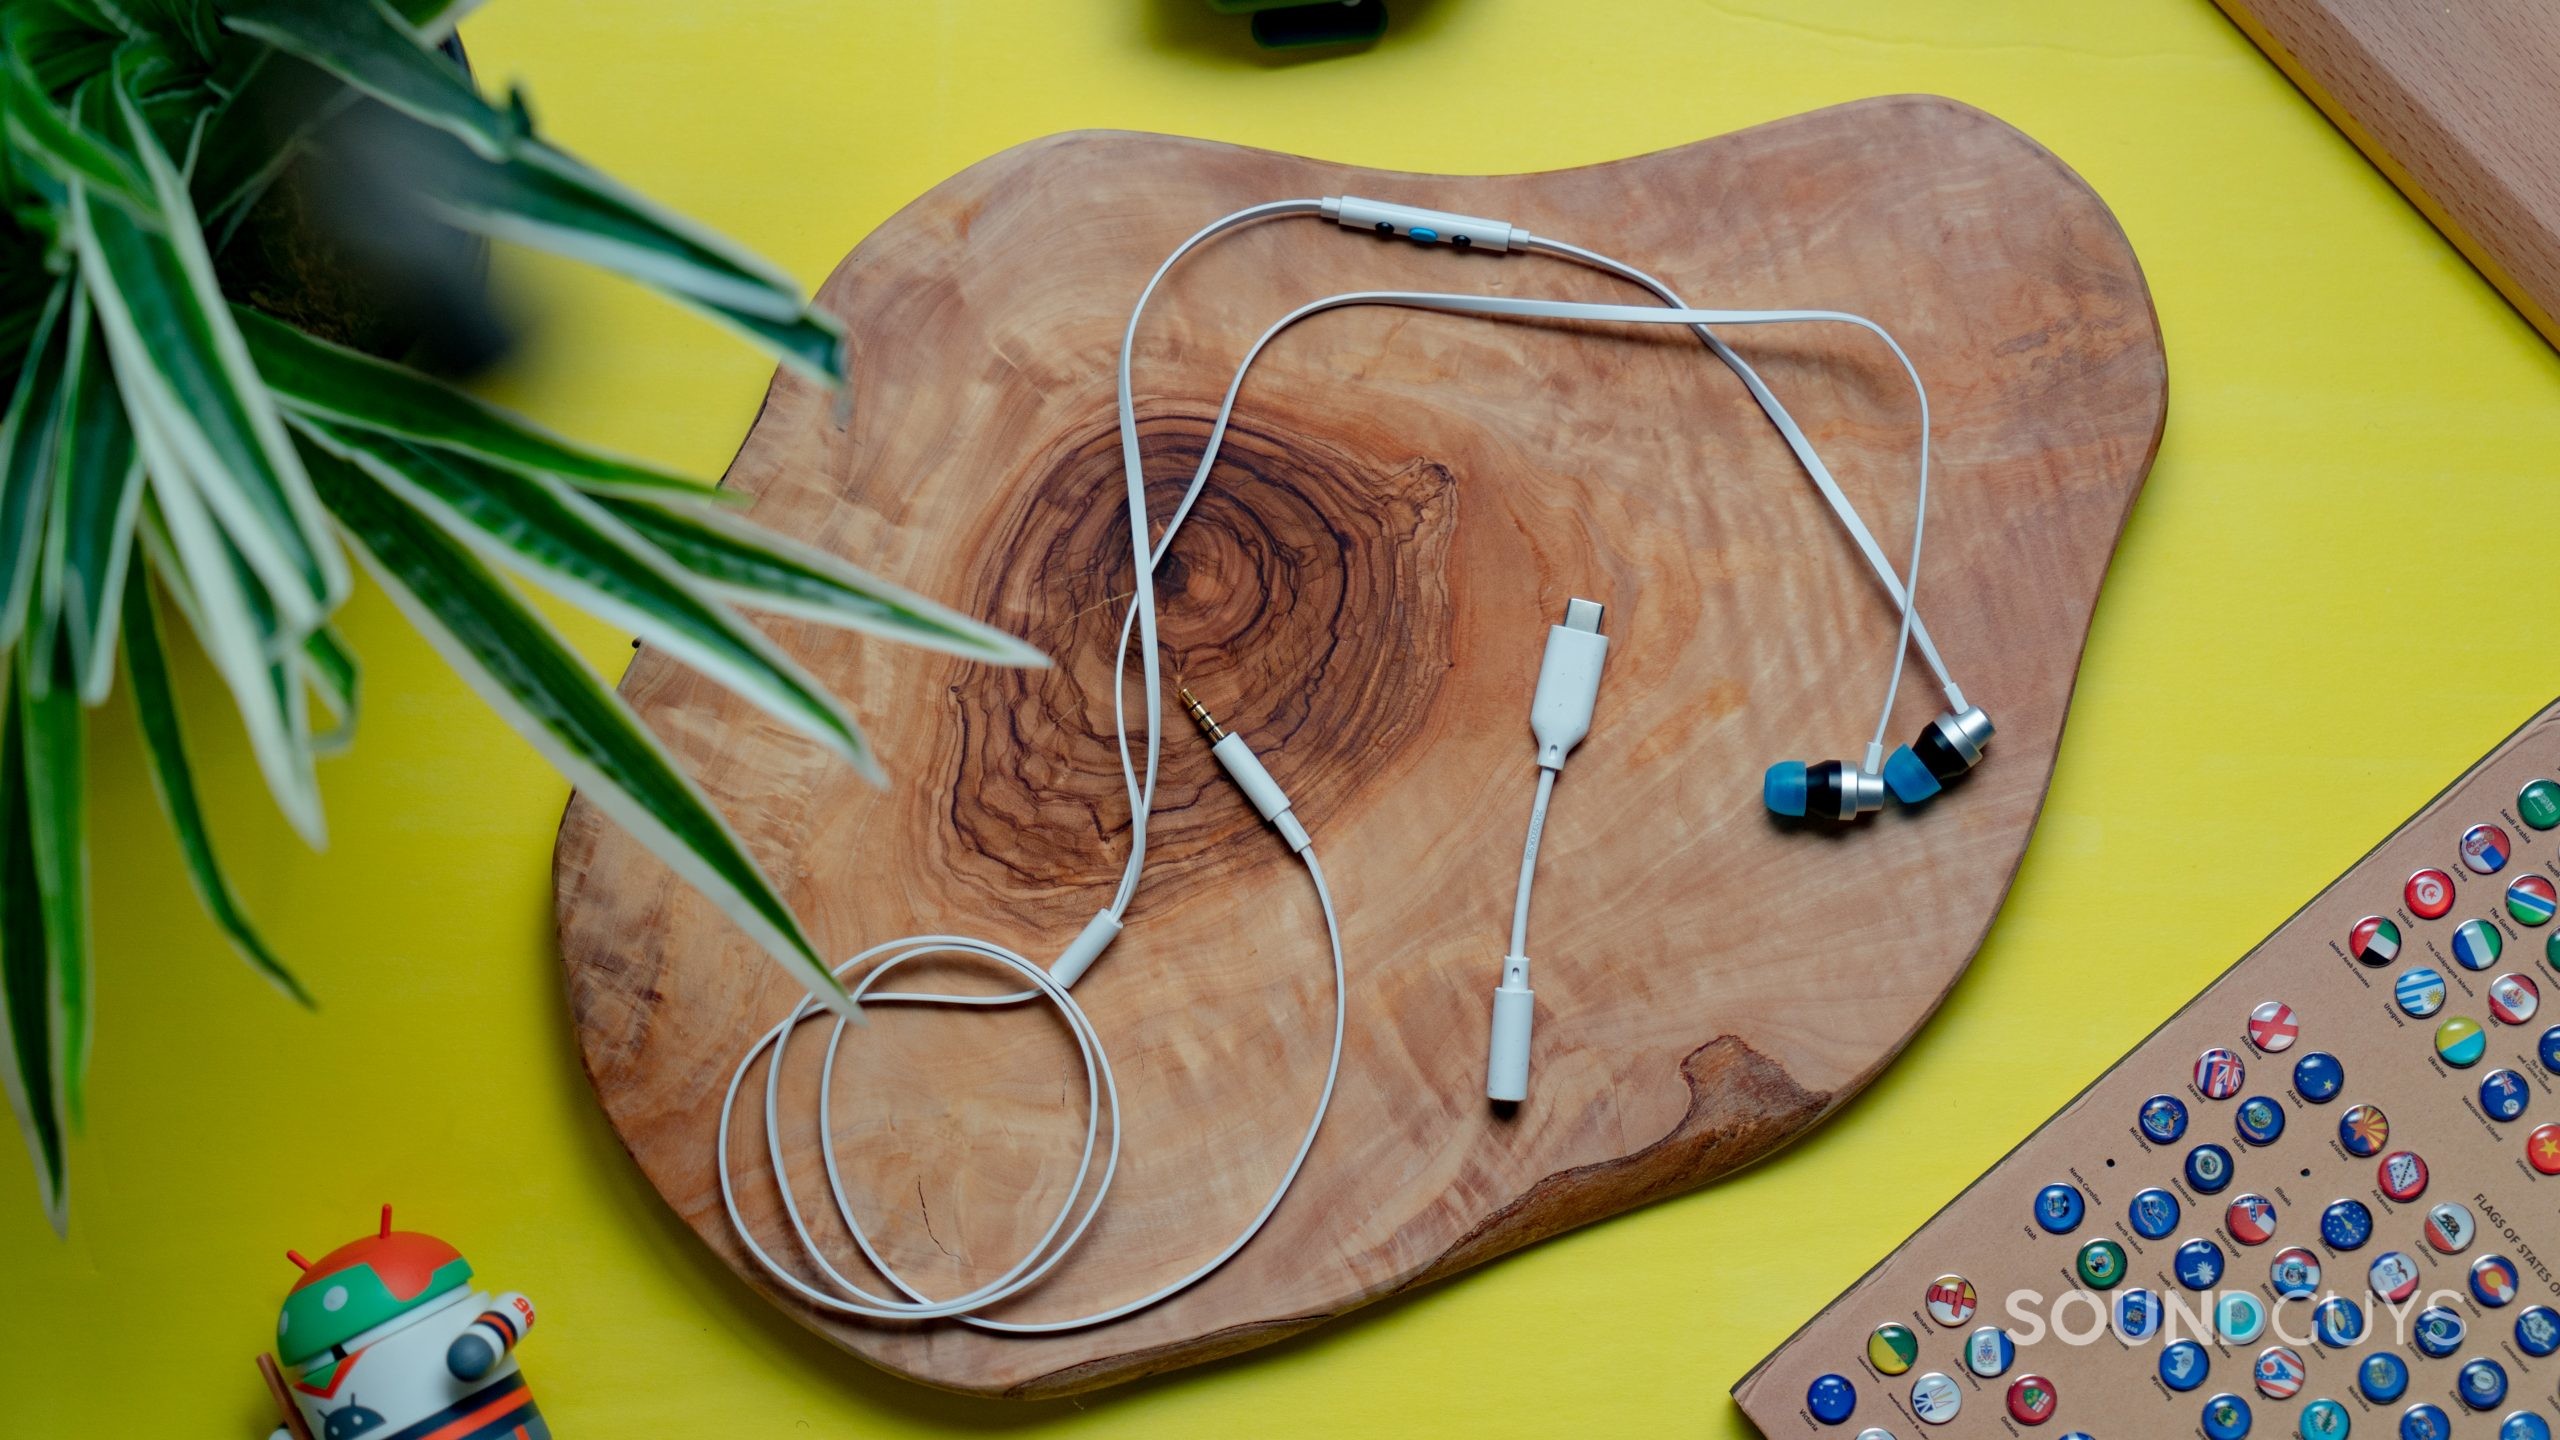 The Logitech G333 earbuds and cable placed on top of a wooden surface with a plant to the left of them.